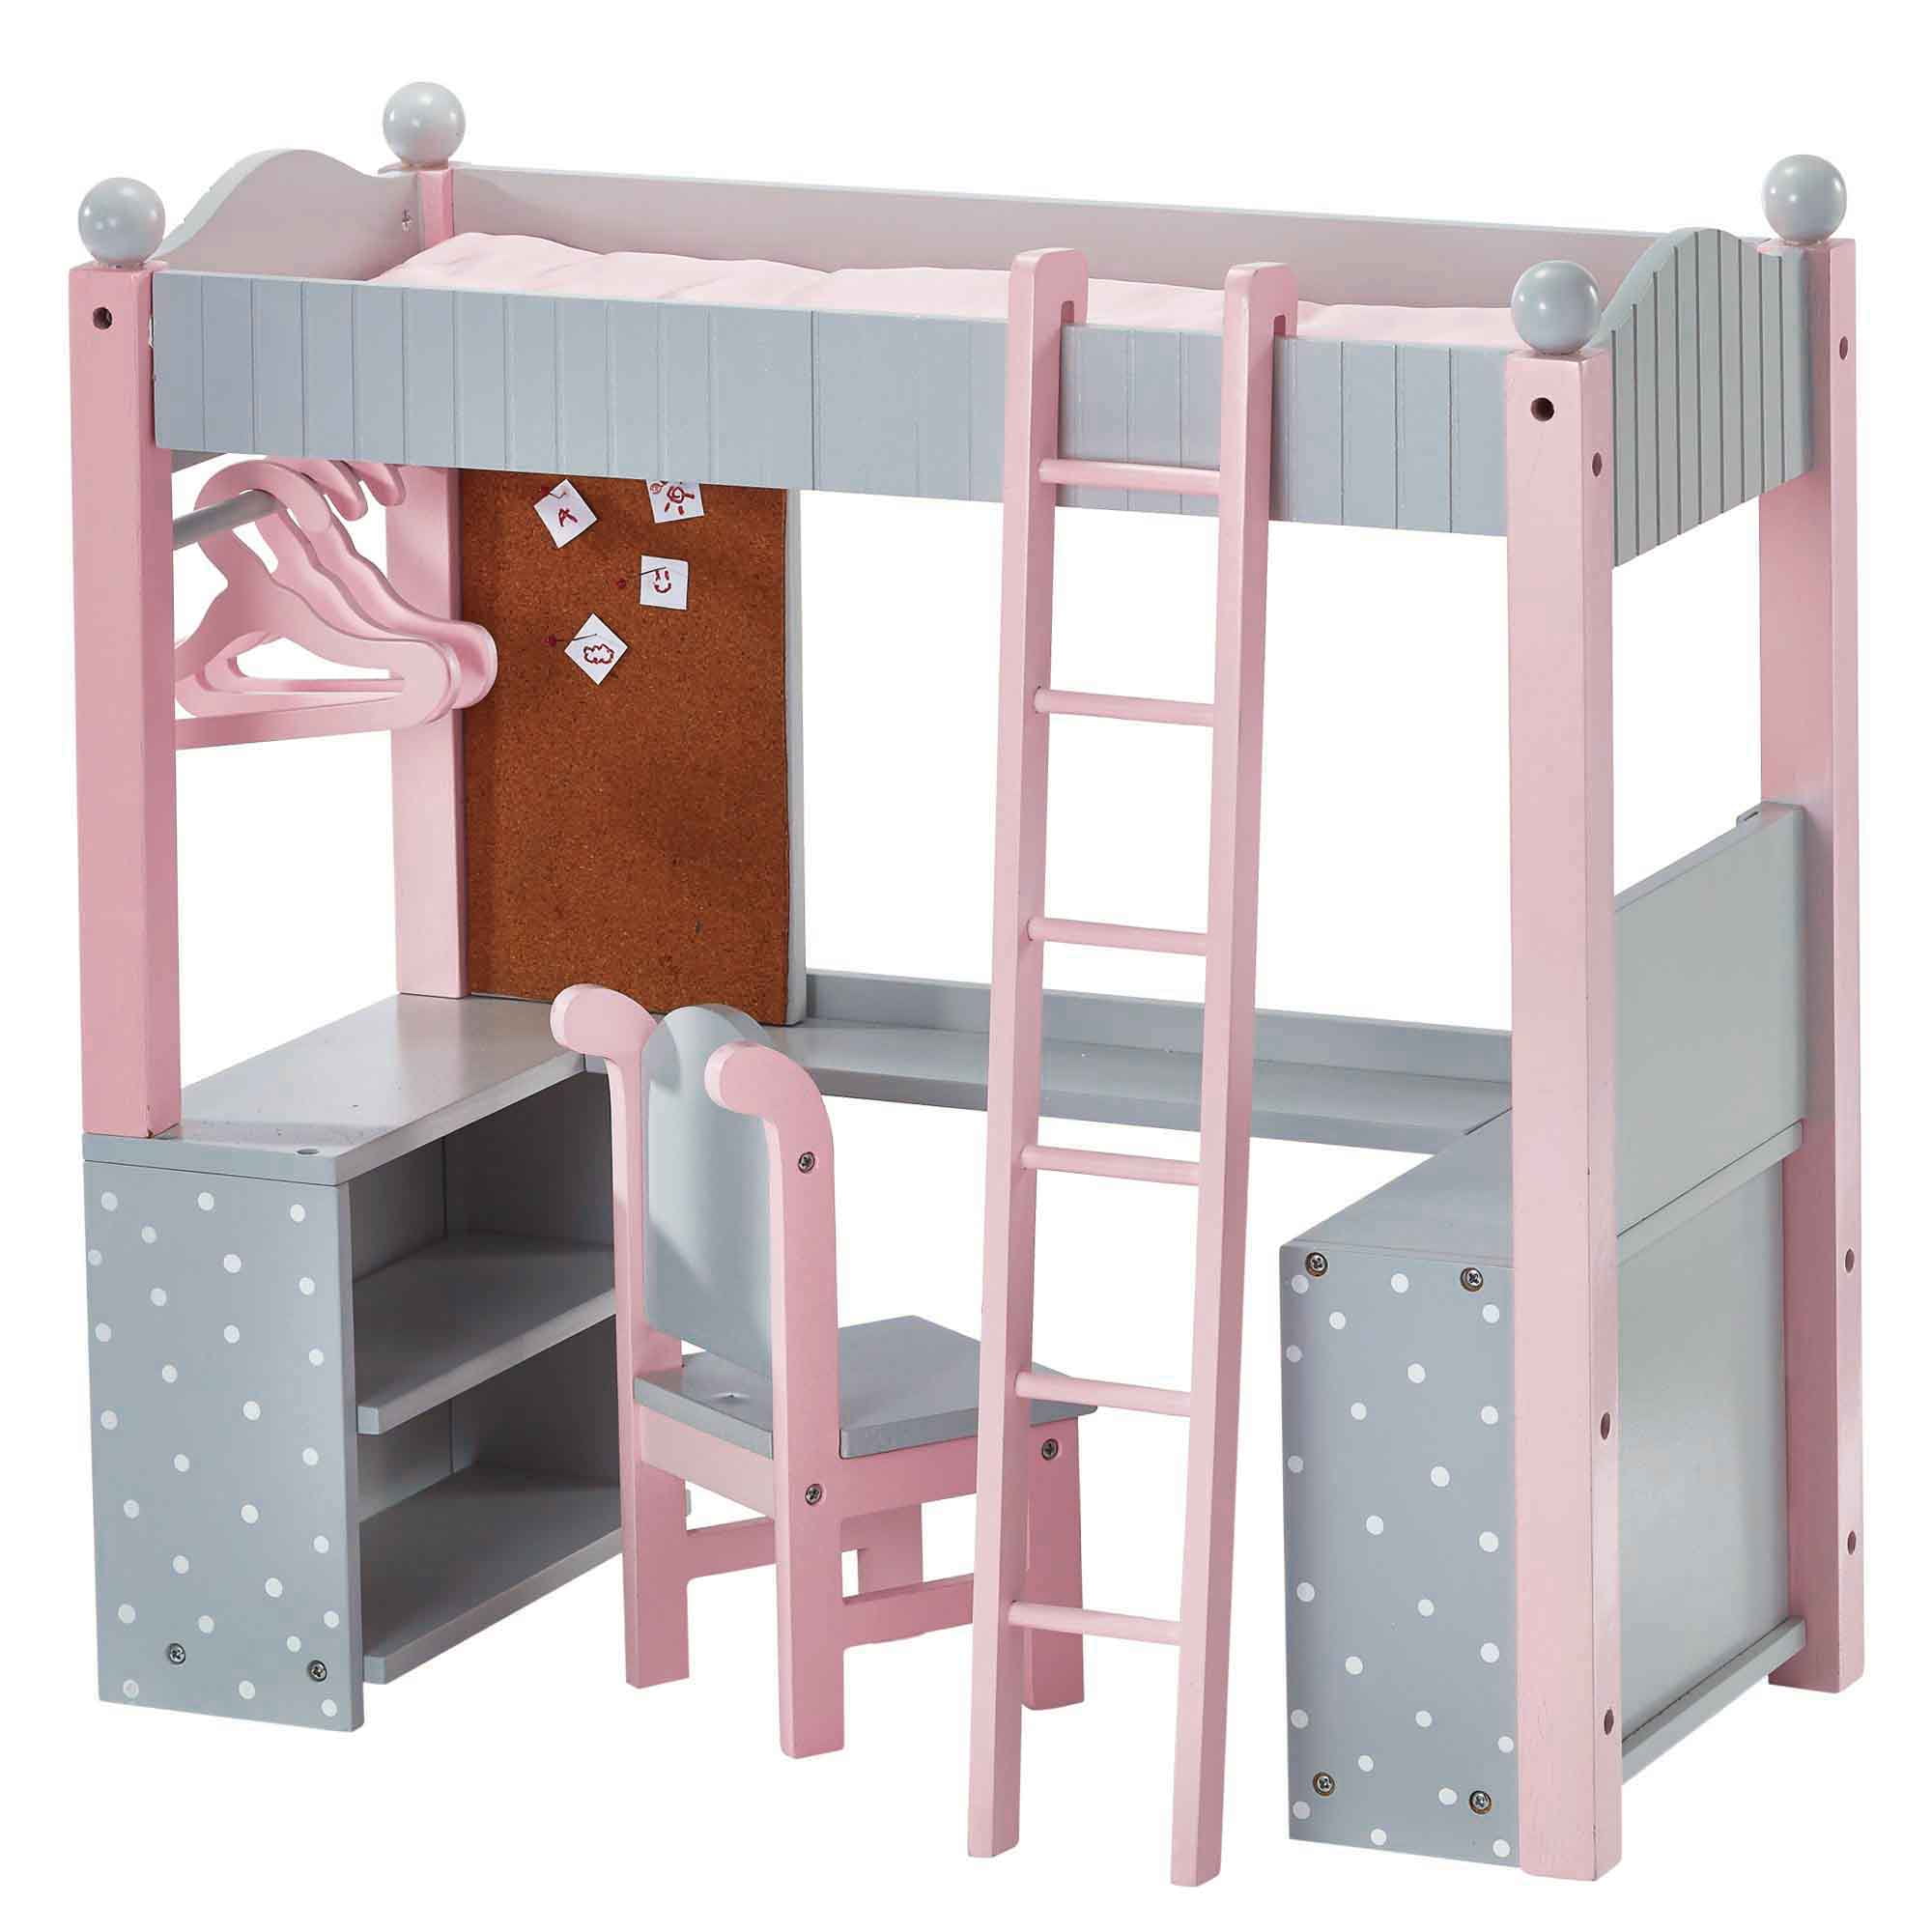 Badger Basket Doll Armoire Bunk Bed, Badger Basket Doll Bunk Beds With Ladder And Storage Armoire